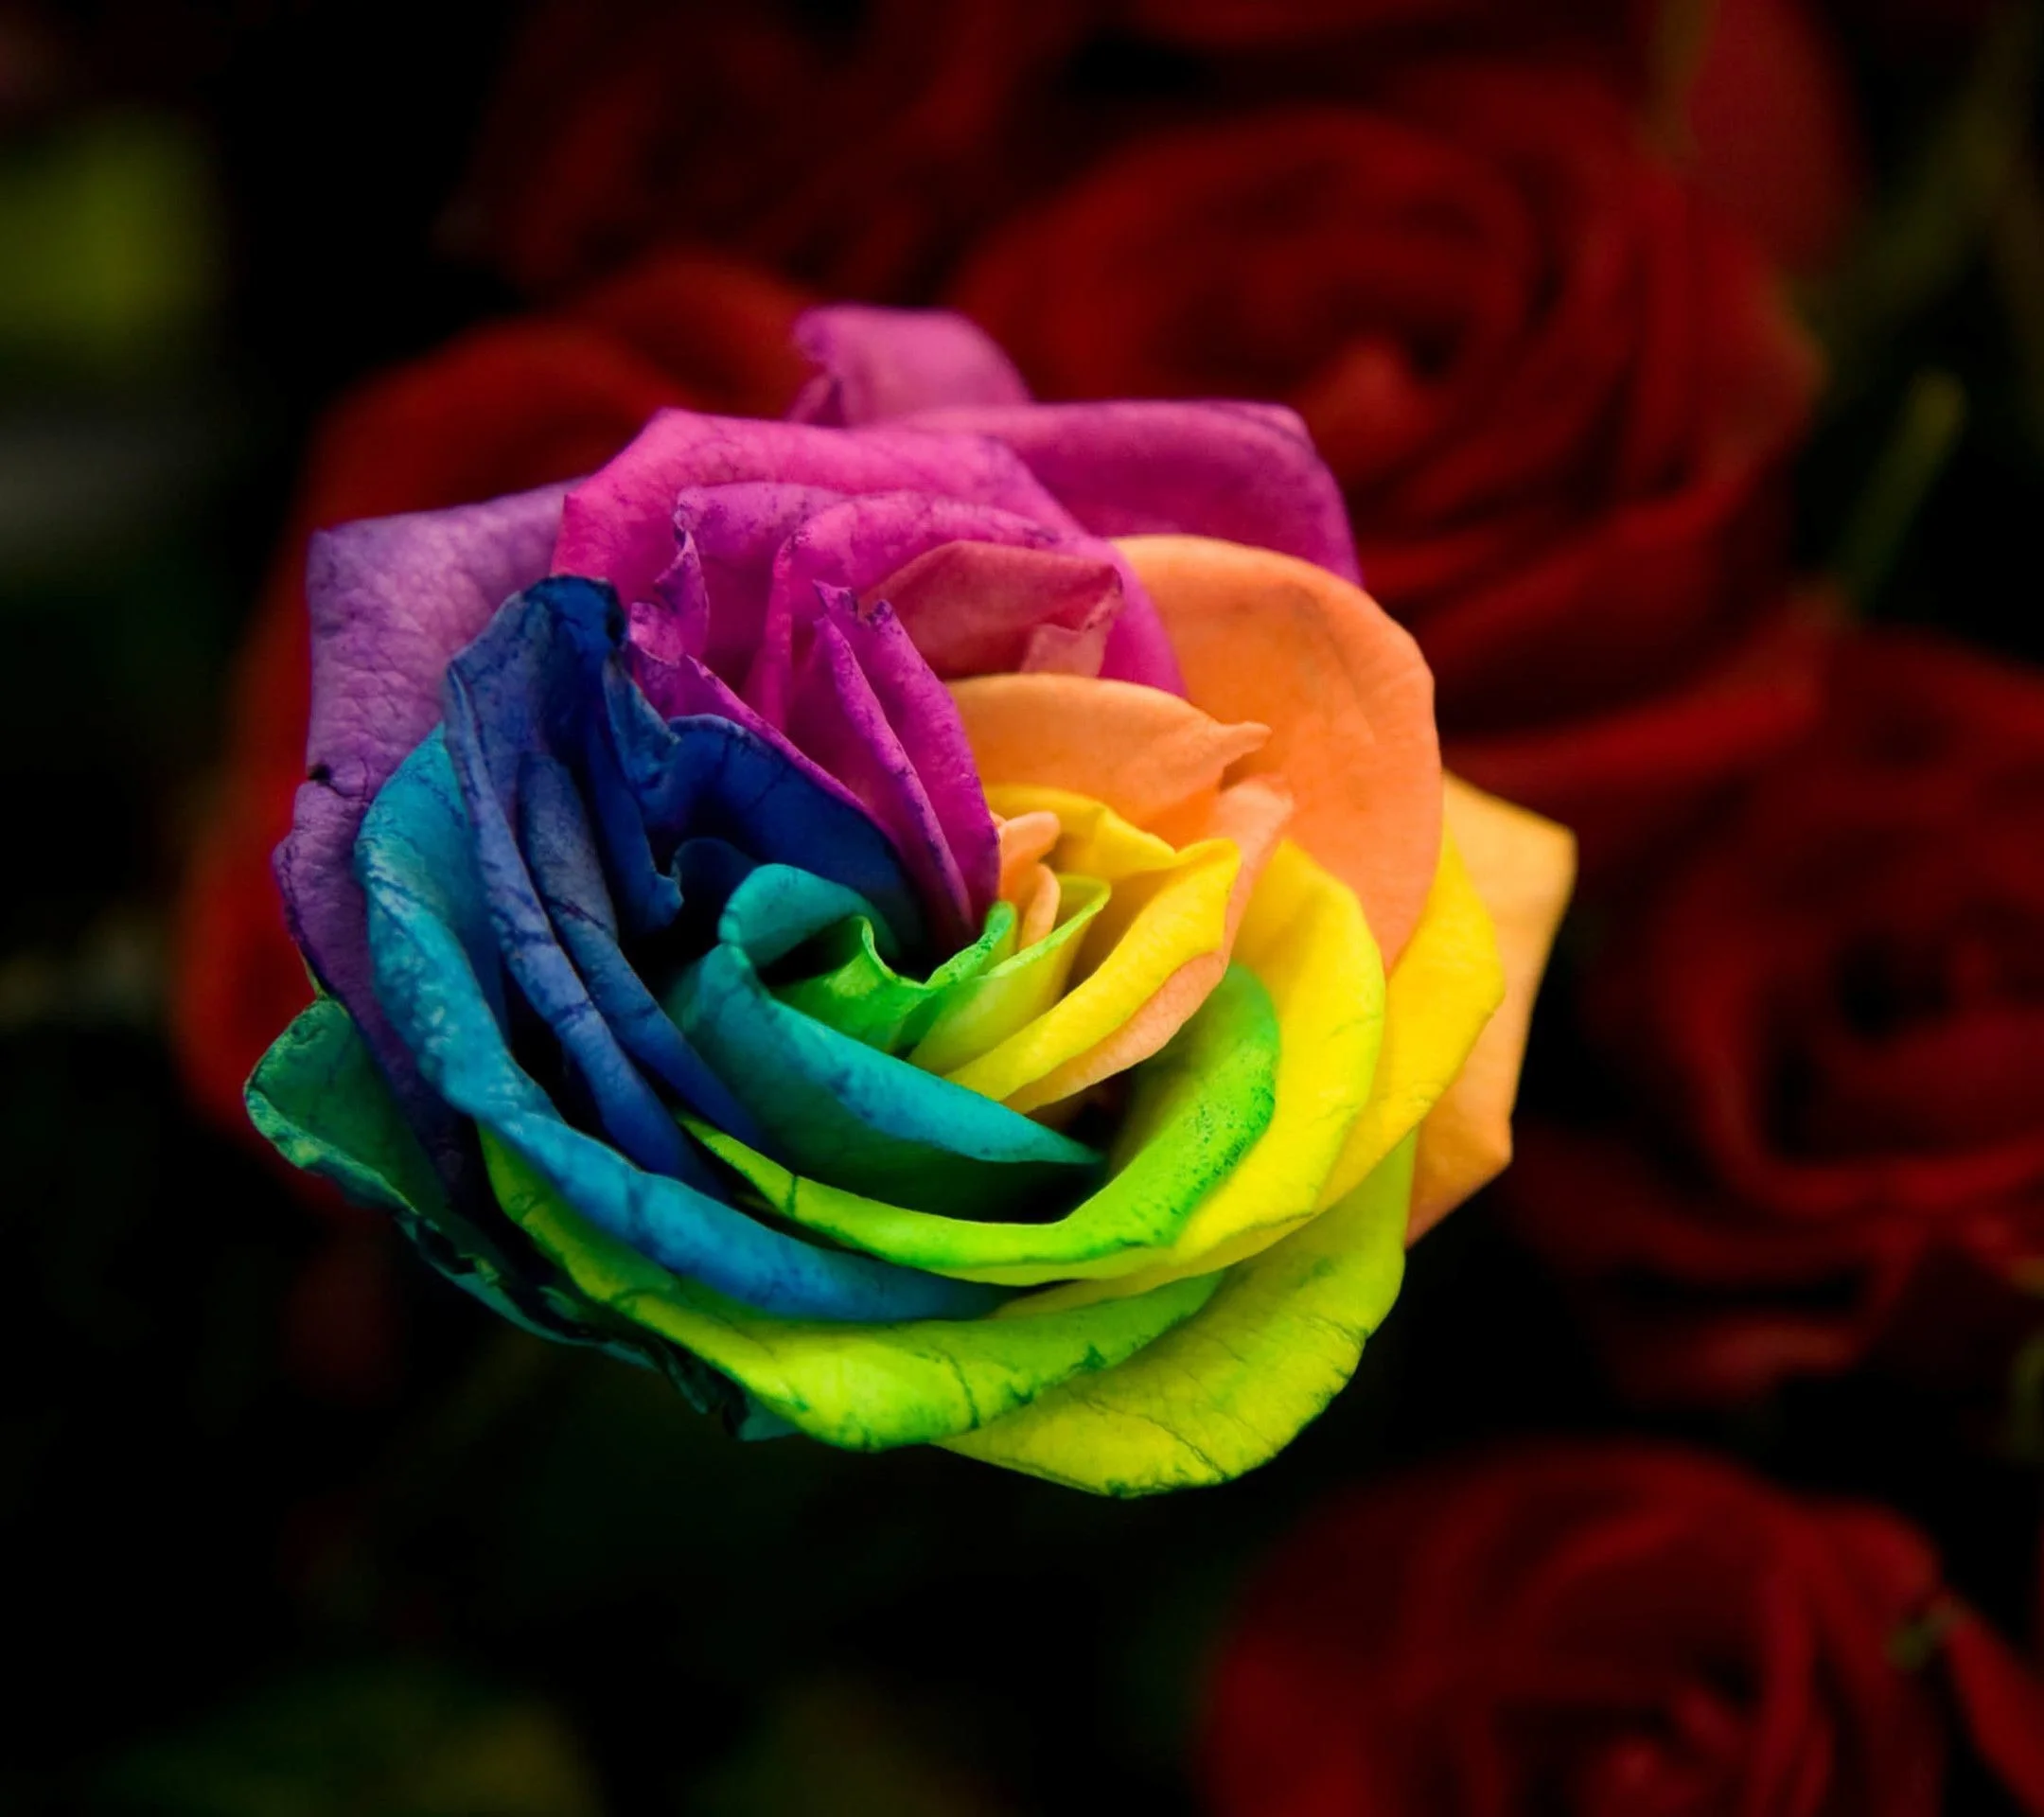 How a Rainbow Rose Works (and How To Make One): A rainbow rose is a real  rose grown to produce petals in the colors of the rainbow.